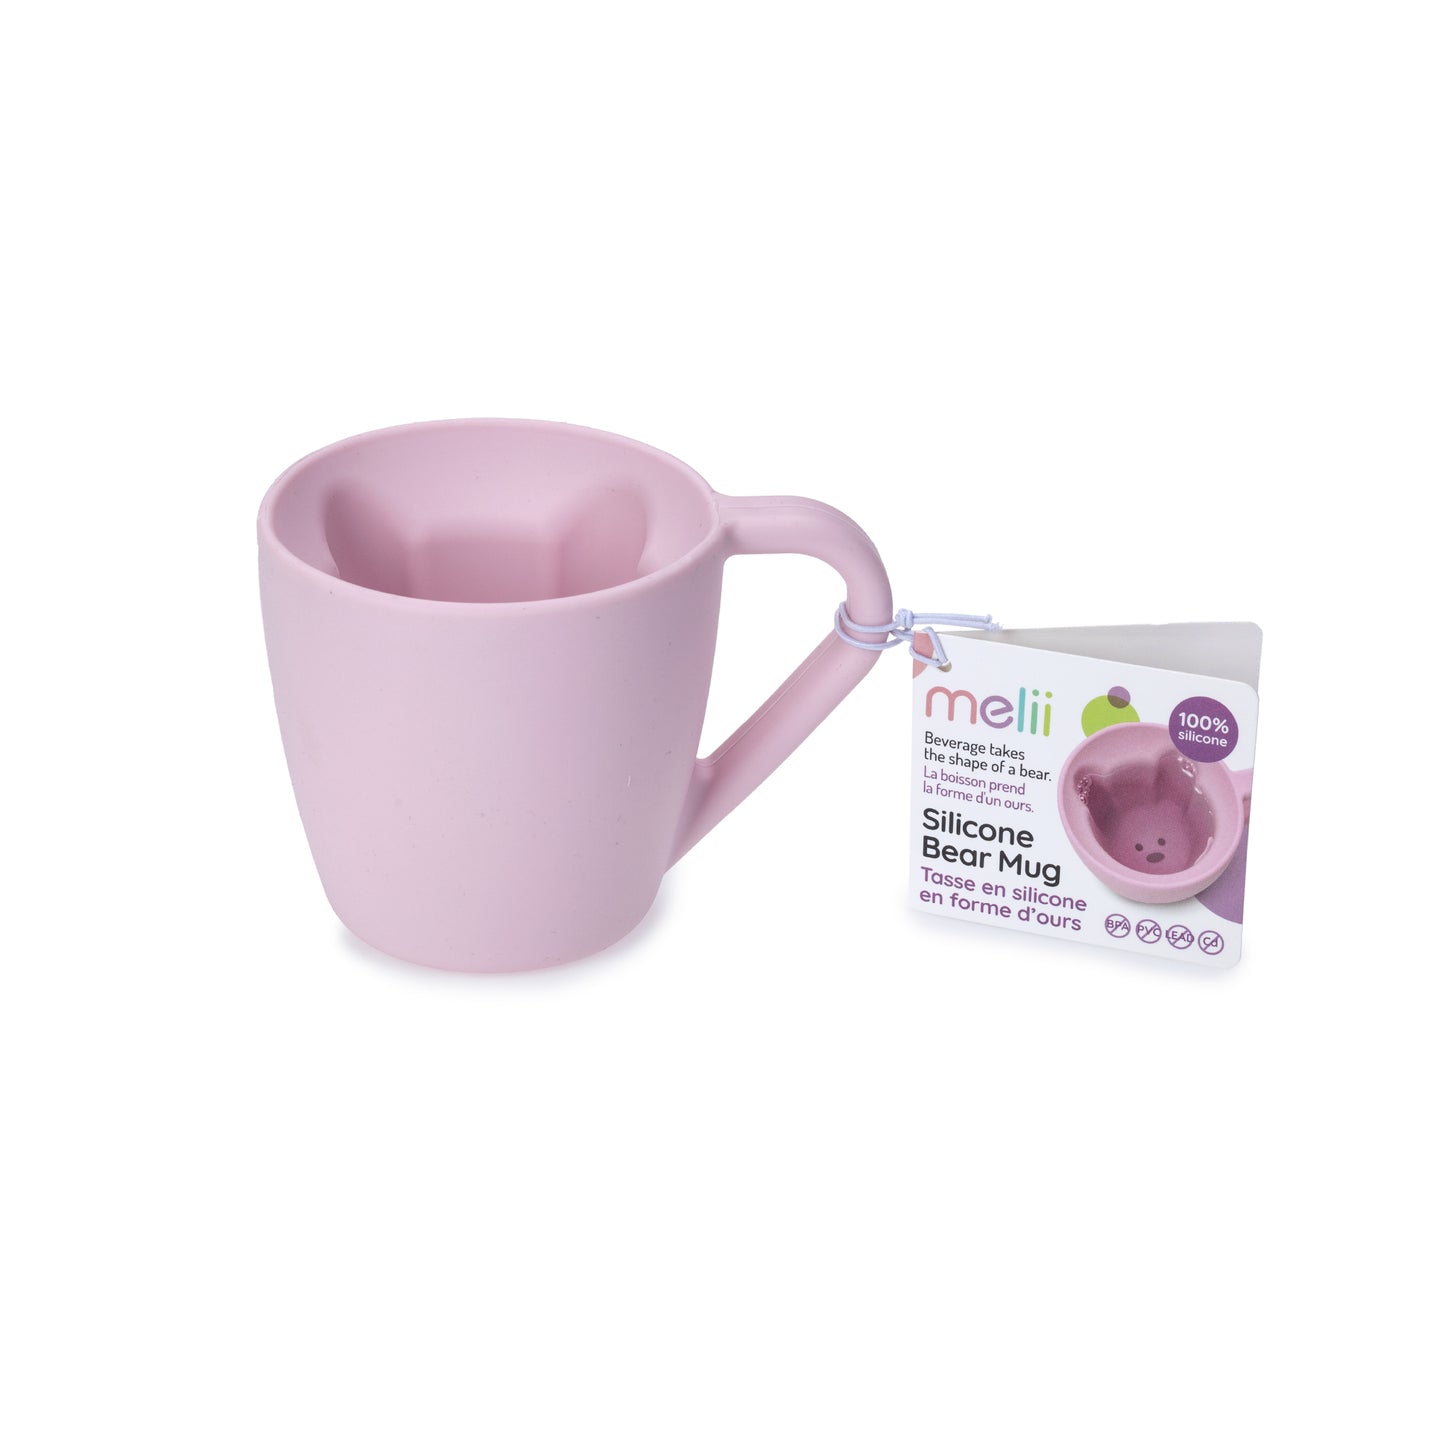 Melii Pretend Play Pink Bear Mug for Kids - Imaginative Silicone Cup with Magical Bear-Shaped Beverage, Perfect for Hot and Cold Drinks - Durable, BPA-Free